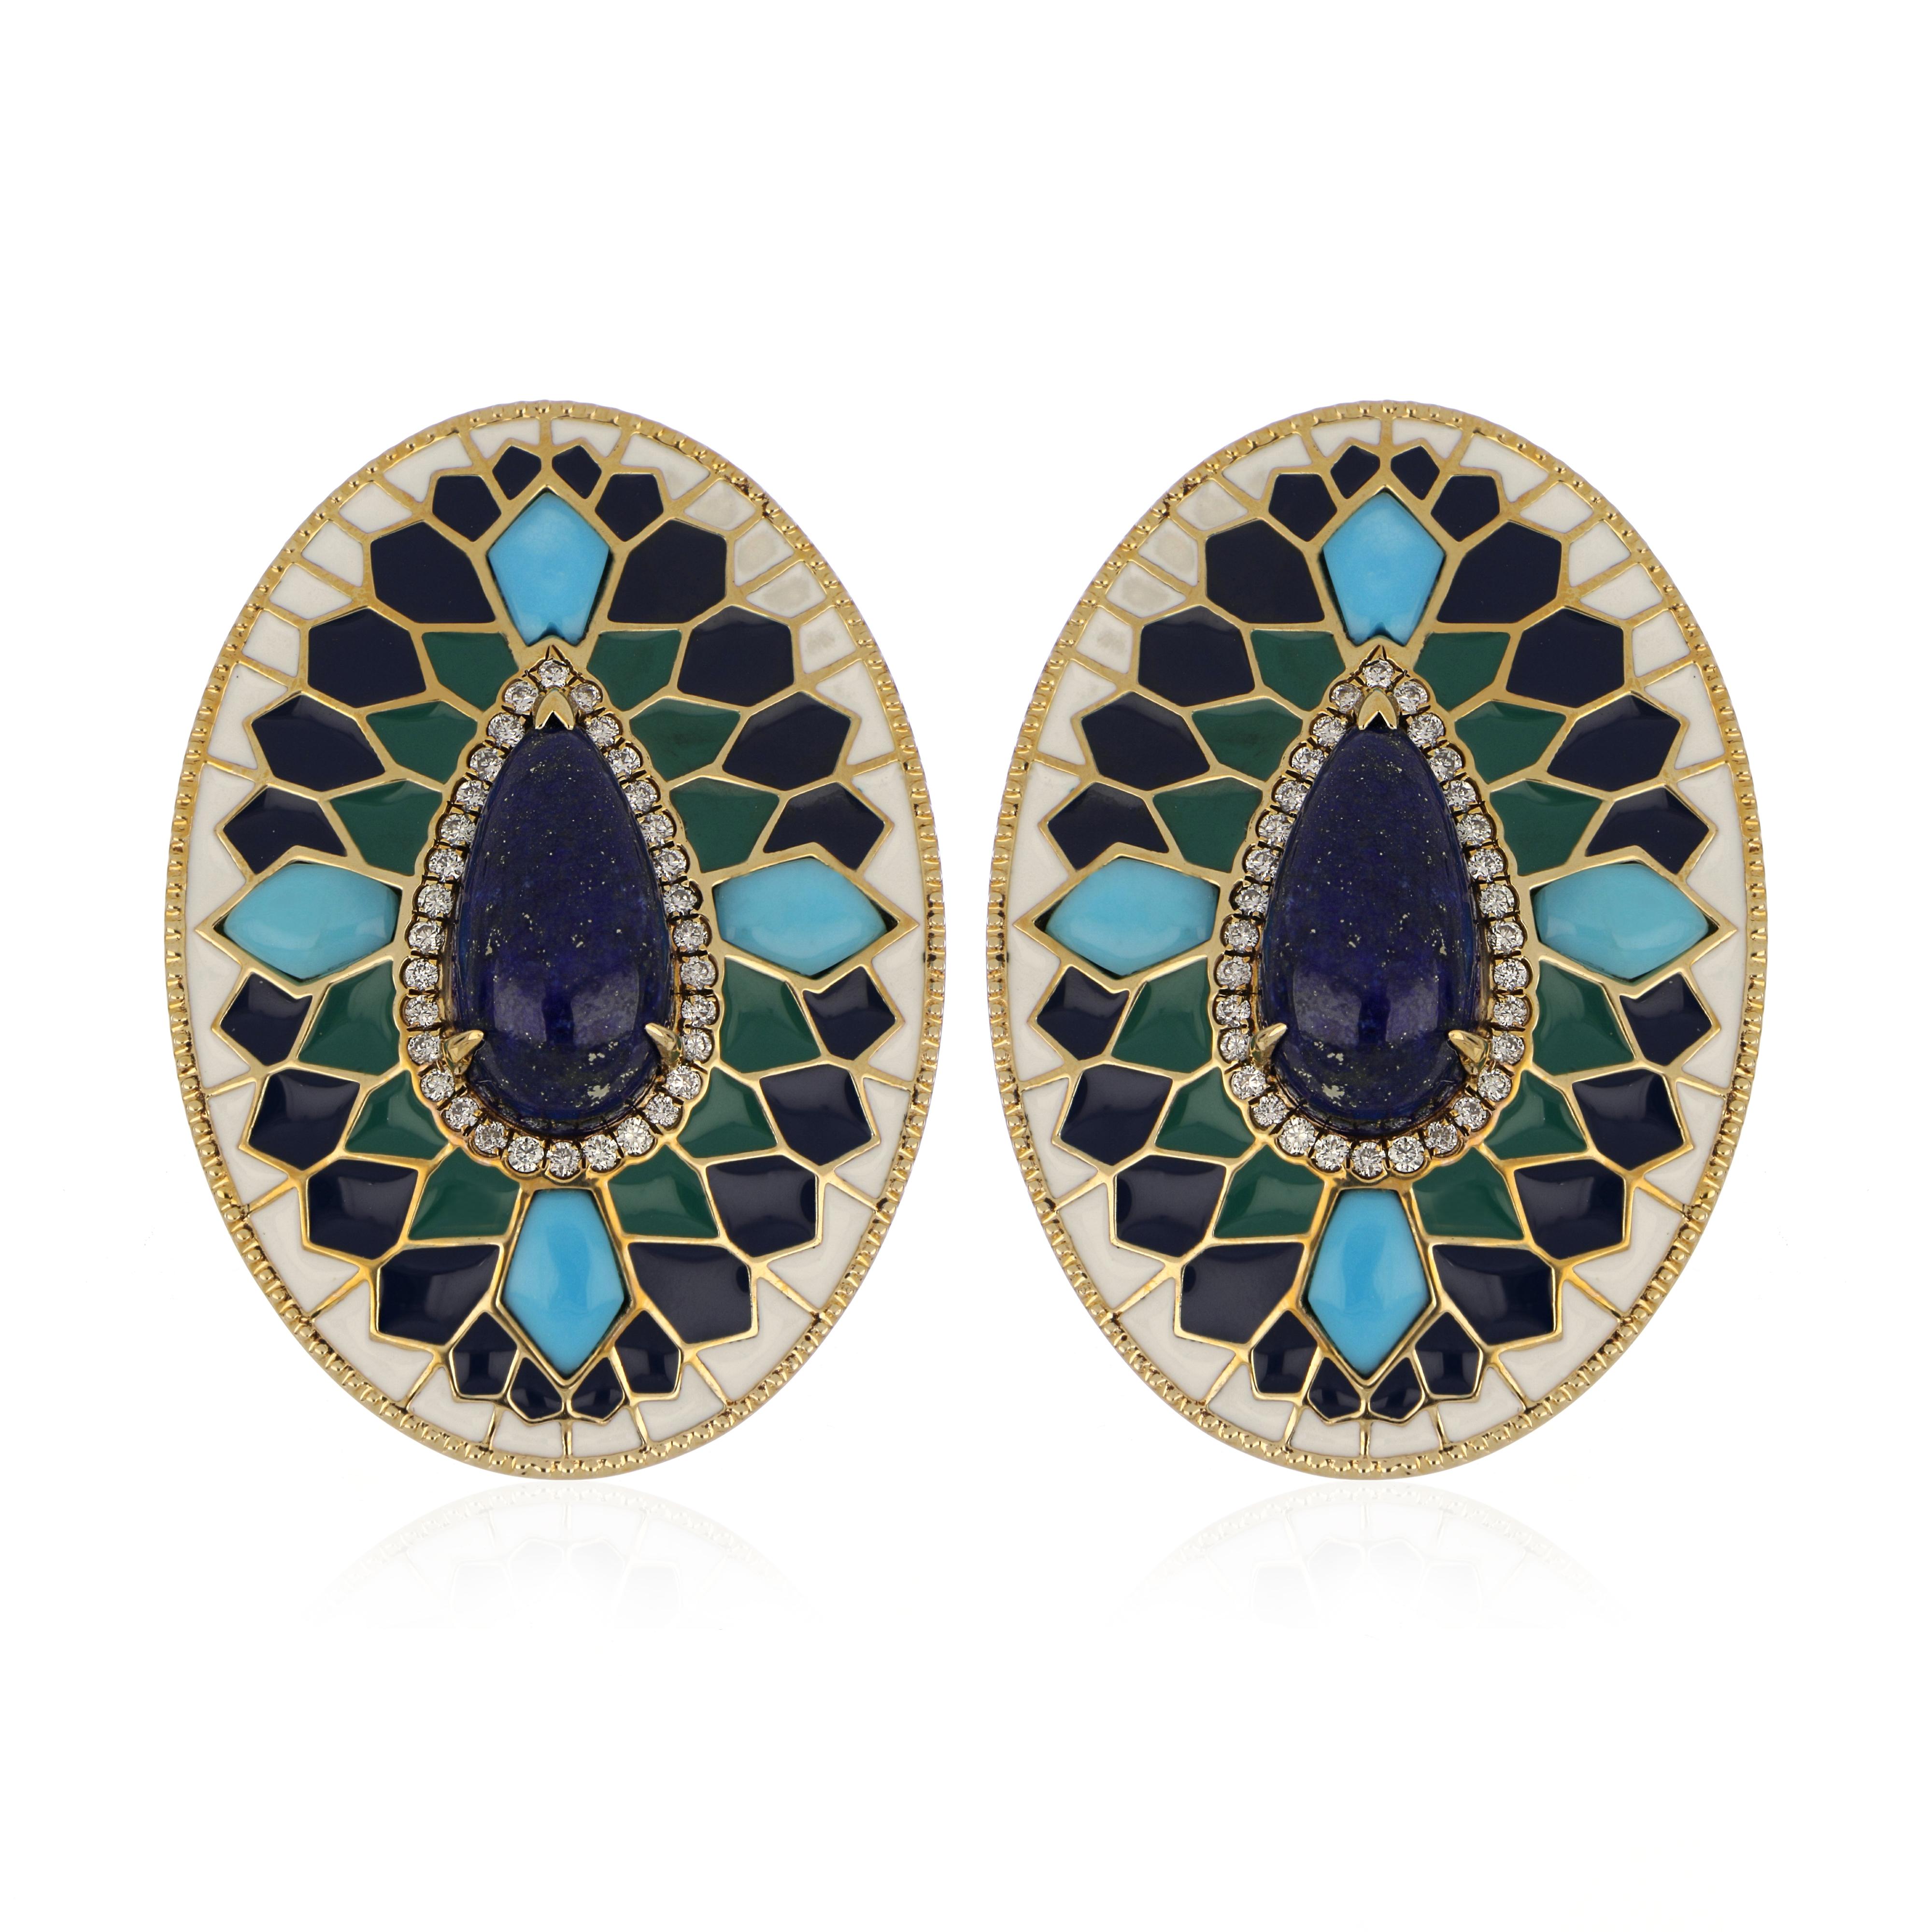 Elegant and exquisite Multi Color Enamel Cocktail 14 K Earring, center set with 4.10 Cts. (Total) Cabochon Pear Lapis Lazuli, Surrounded with special cut Turquoise 1.60 Cts accented with Diamonds, weighing approx. 0.24 Cts. Beautifully Hand crafted